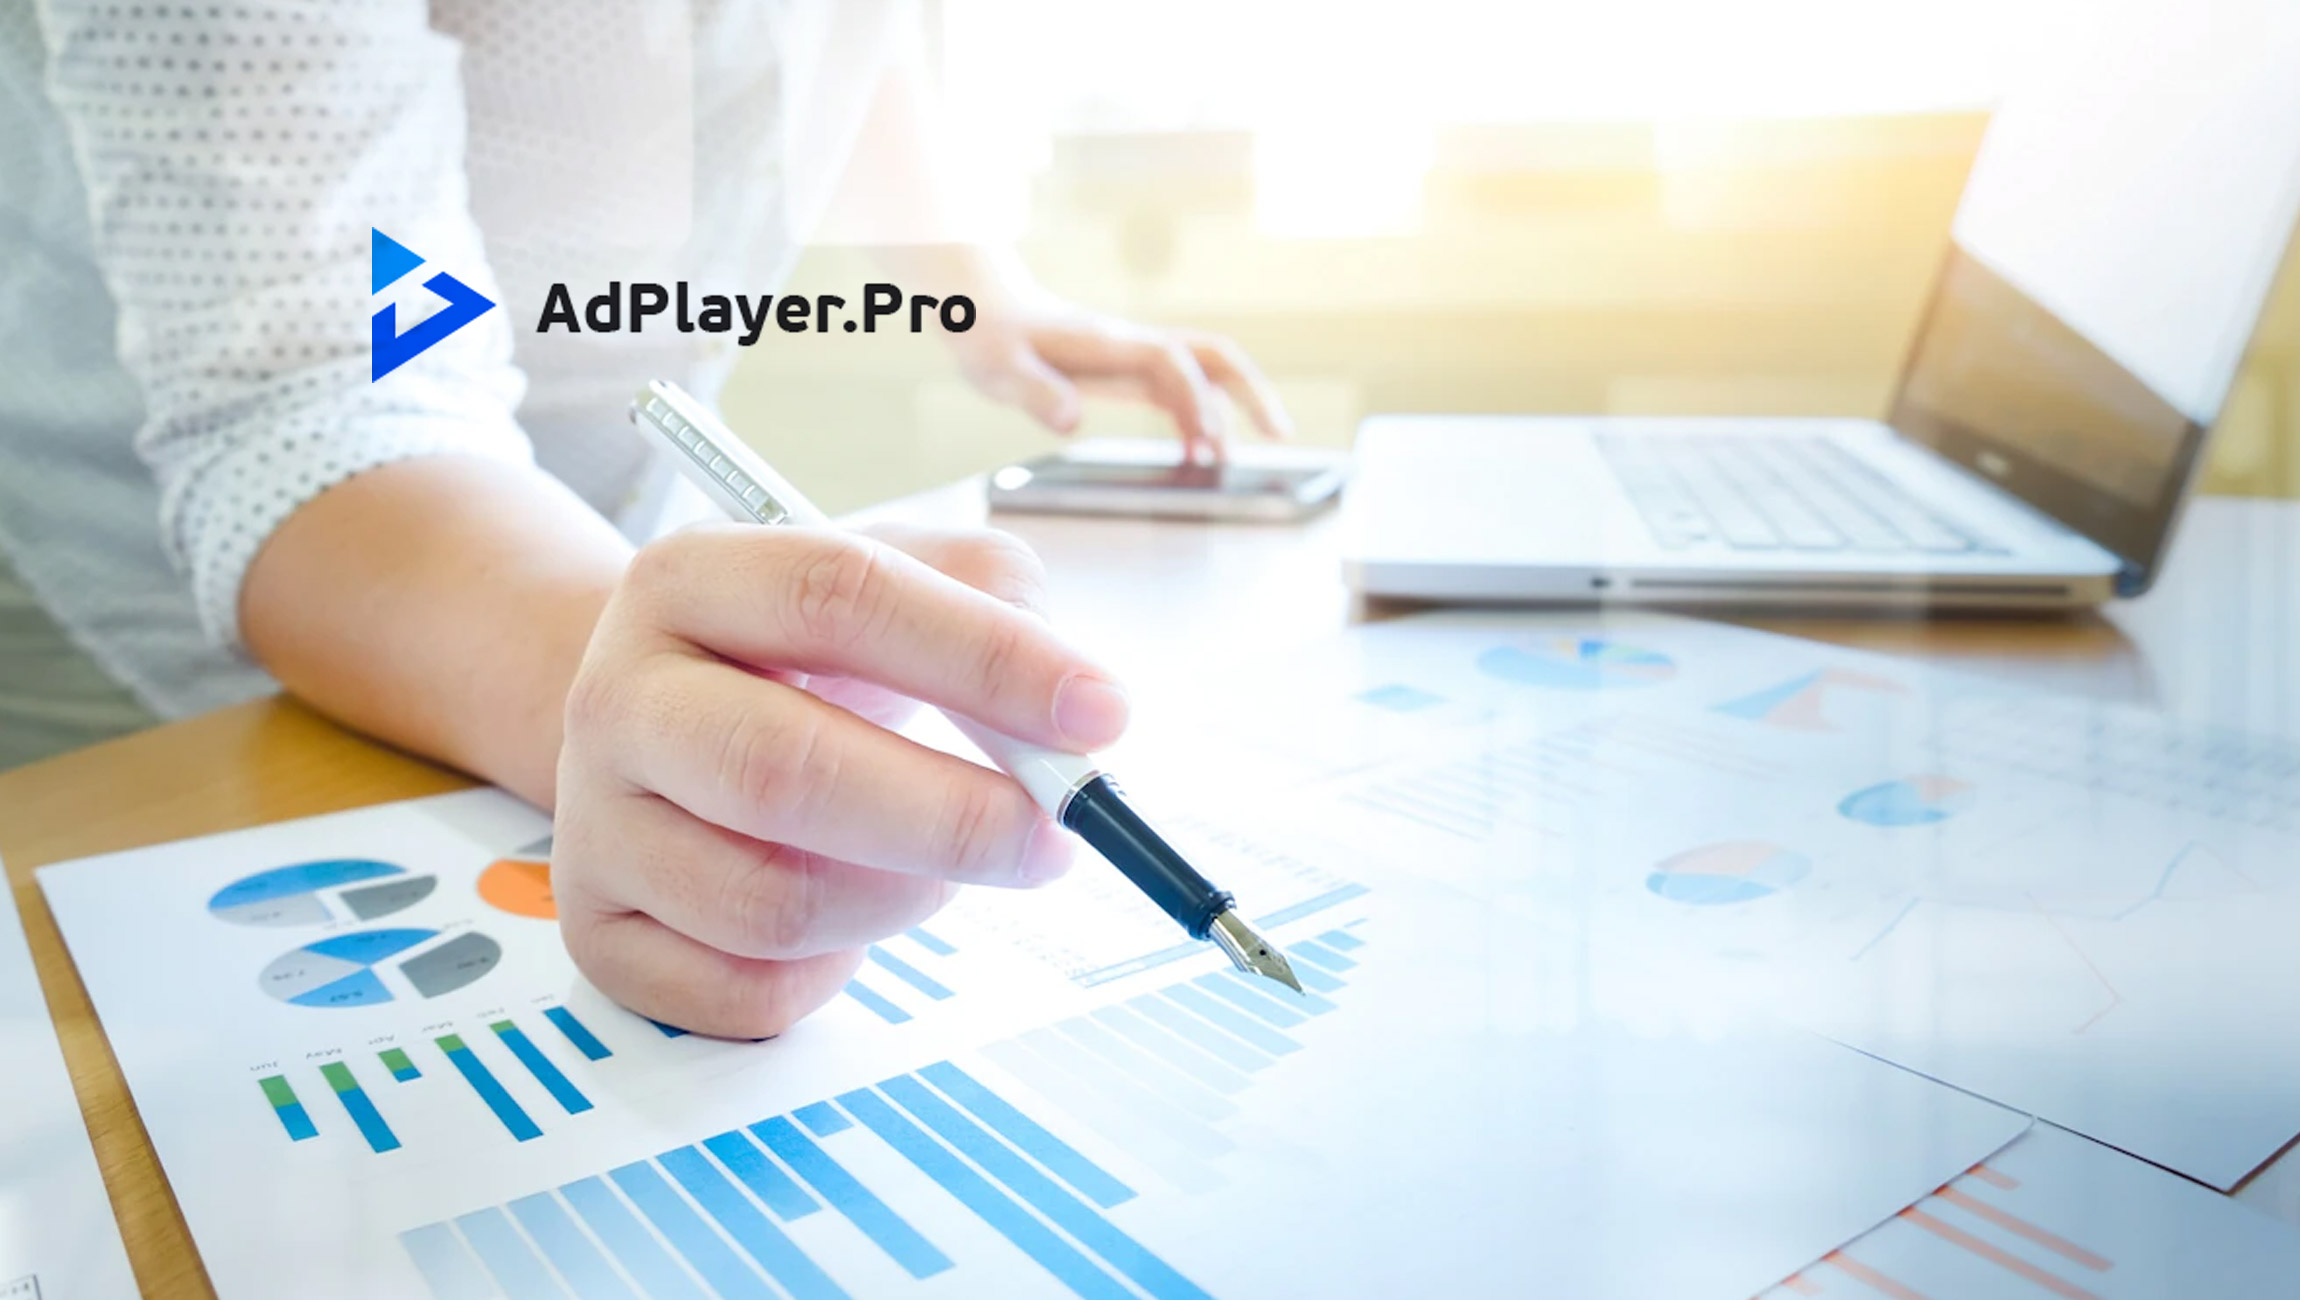 AdPlayer.Pro Outstream Video Ads Solutions Provider Reports Q3 2022 Results 1